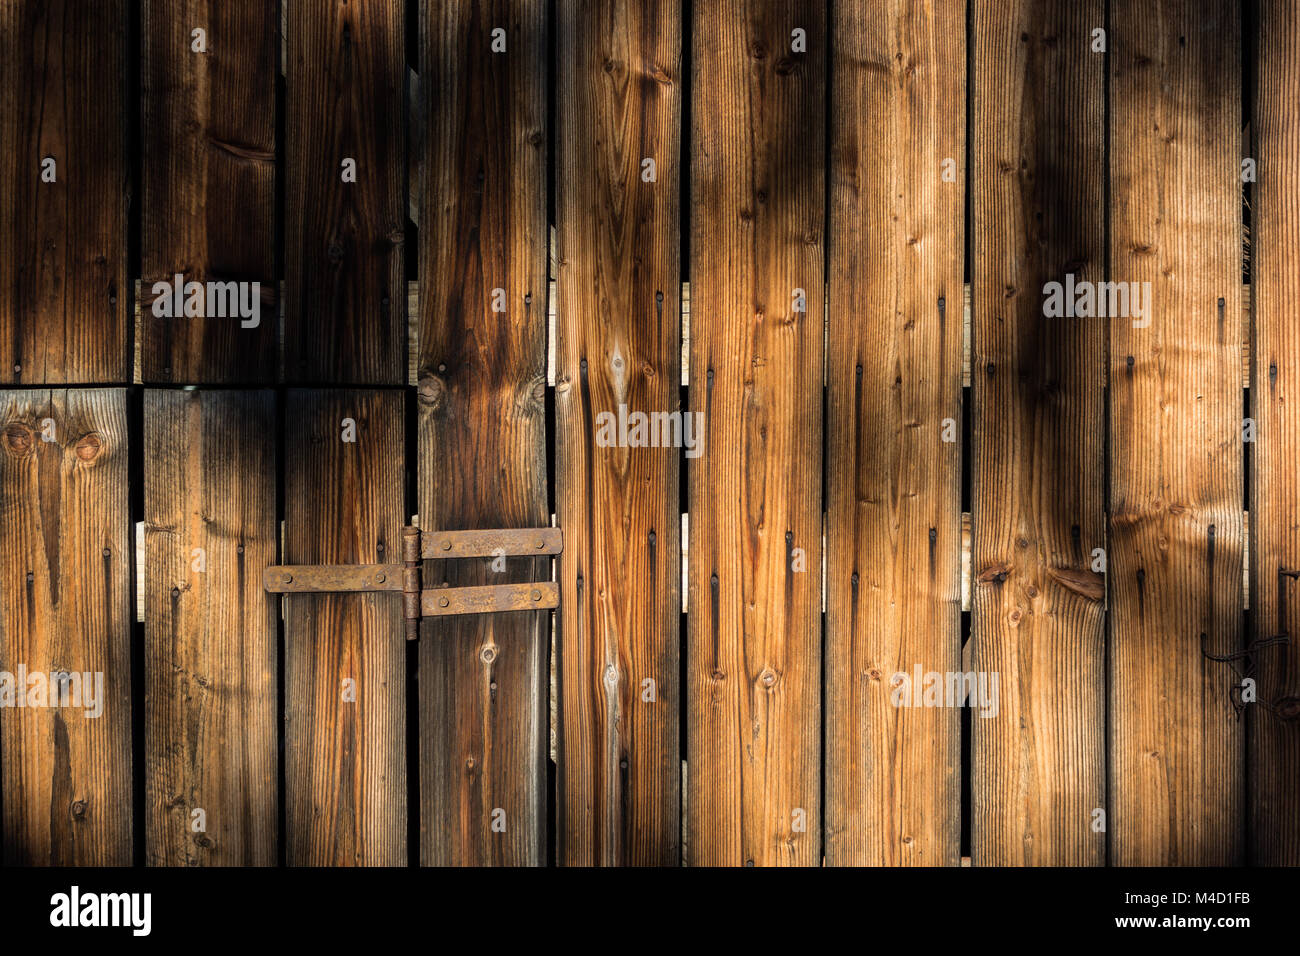 Wooden plank wall Stock Photo